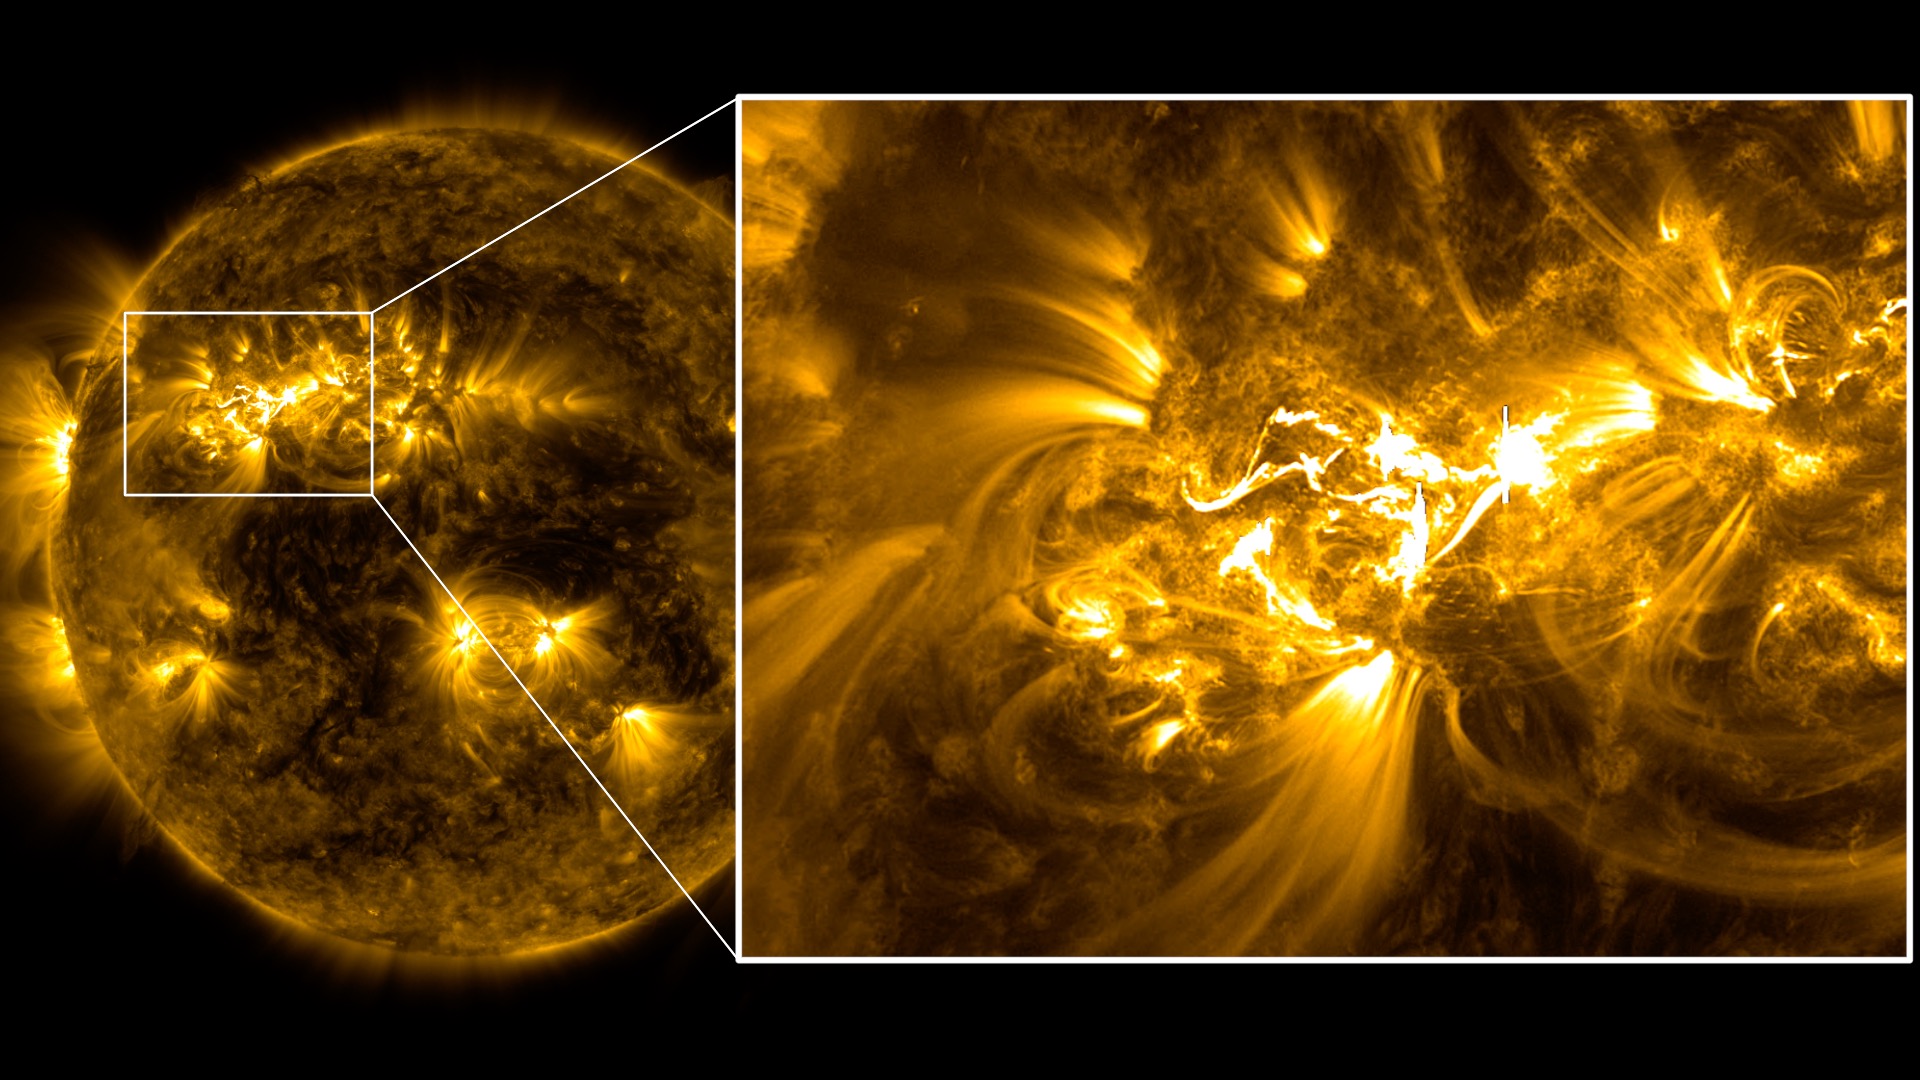 Video of the May 19th M5.6 solar flare captured by SDO in 171 angstrom light.  This view shows the full solar disk and an inset focusing on the region where the flare occured.Credit: NASA/GSFC/SDO